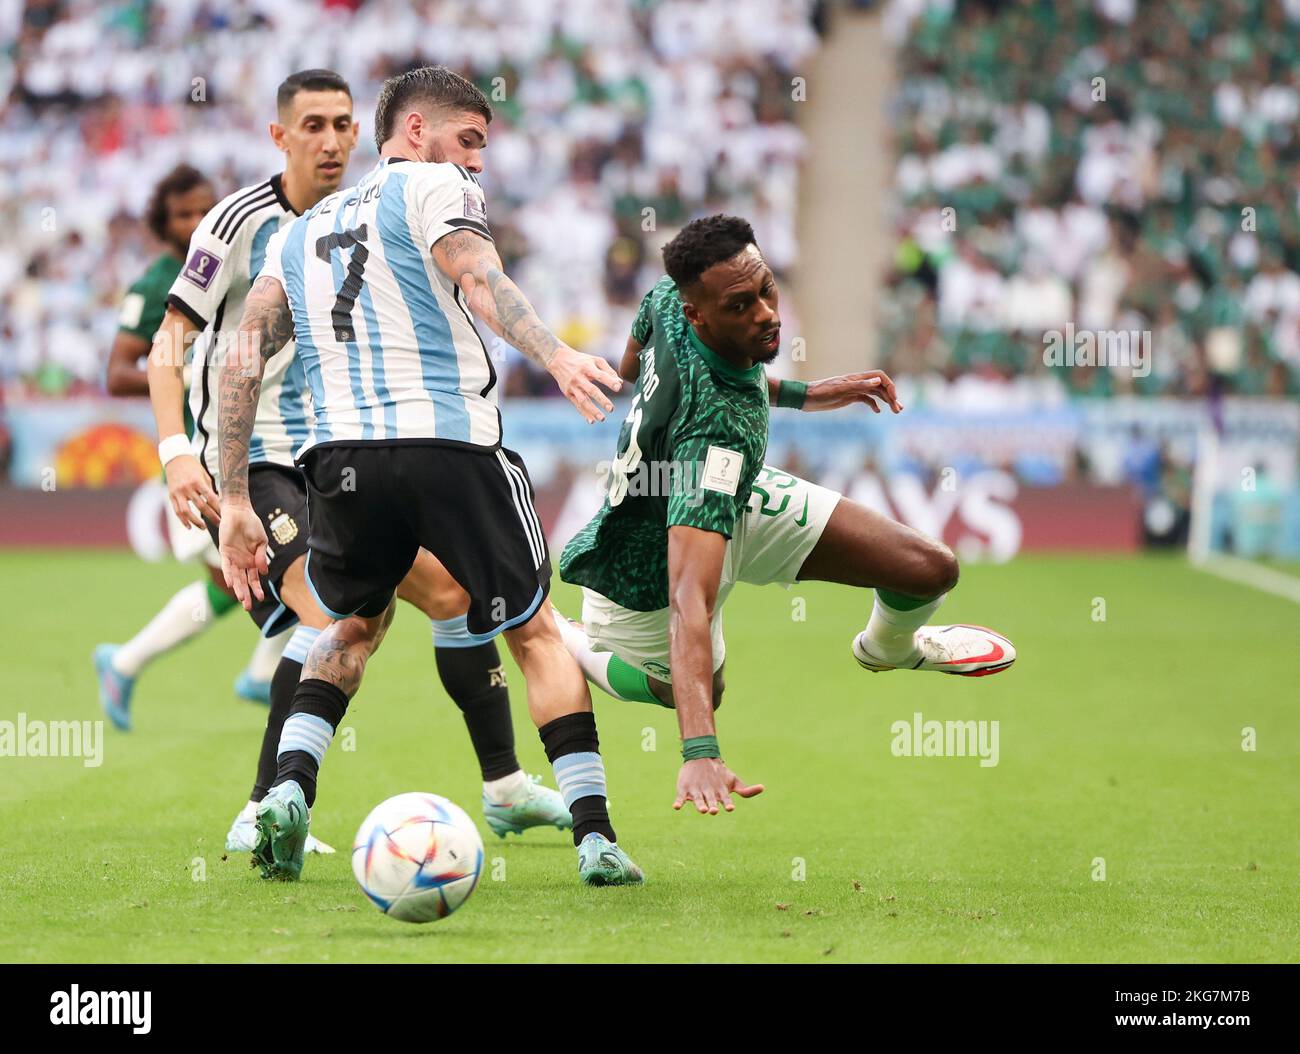 Lusail, Qatar. 22nd Nov, 2022. Mohamed Kanno (R) of Saudi Arabia vies with Rodrigo de Paul (C) of Argentina during the Group C match between Argentina and Saudi Arabia at the 2022 FIFA World Cup at Lusail Stadium in Lusail, Qatar, Nov. 22, 2022. Credit: Cao Can/Xinhua/Alamy Live News Stock Photo